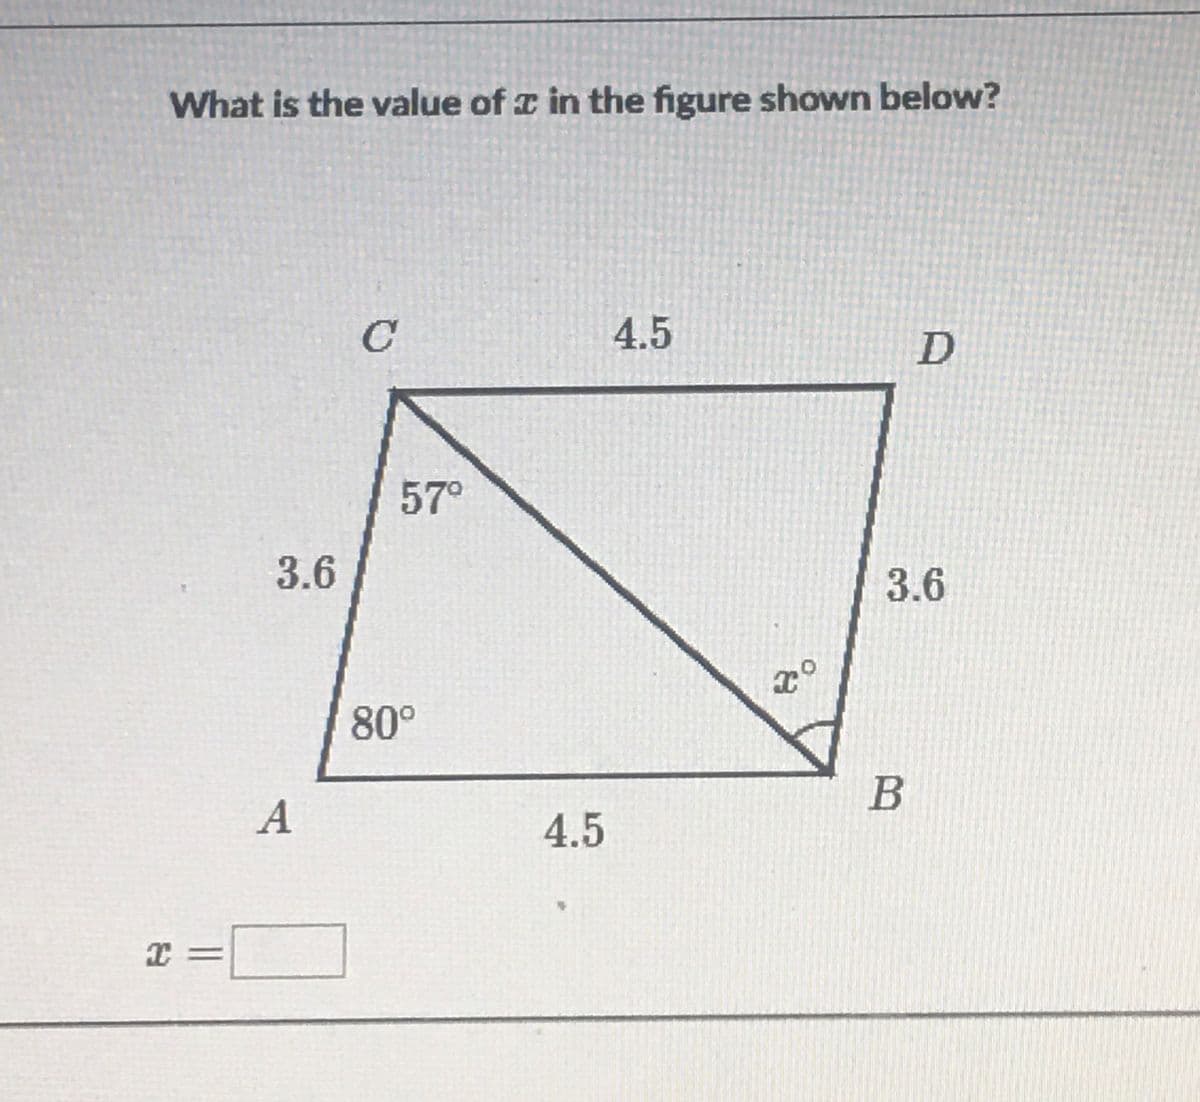 What is the value of a in the figure shown below?
C'
4.5
57°
3.6
3.6
80°
B
4.5
